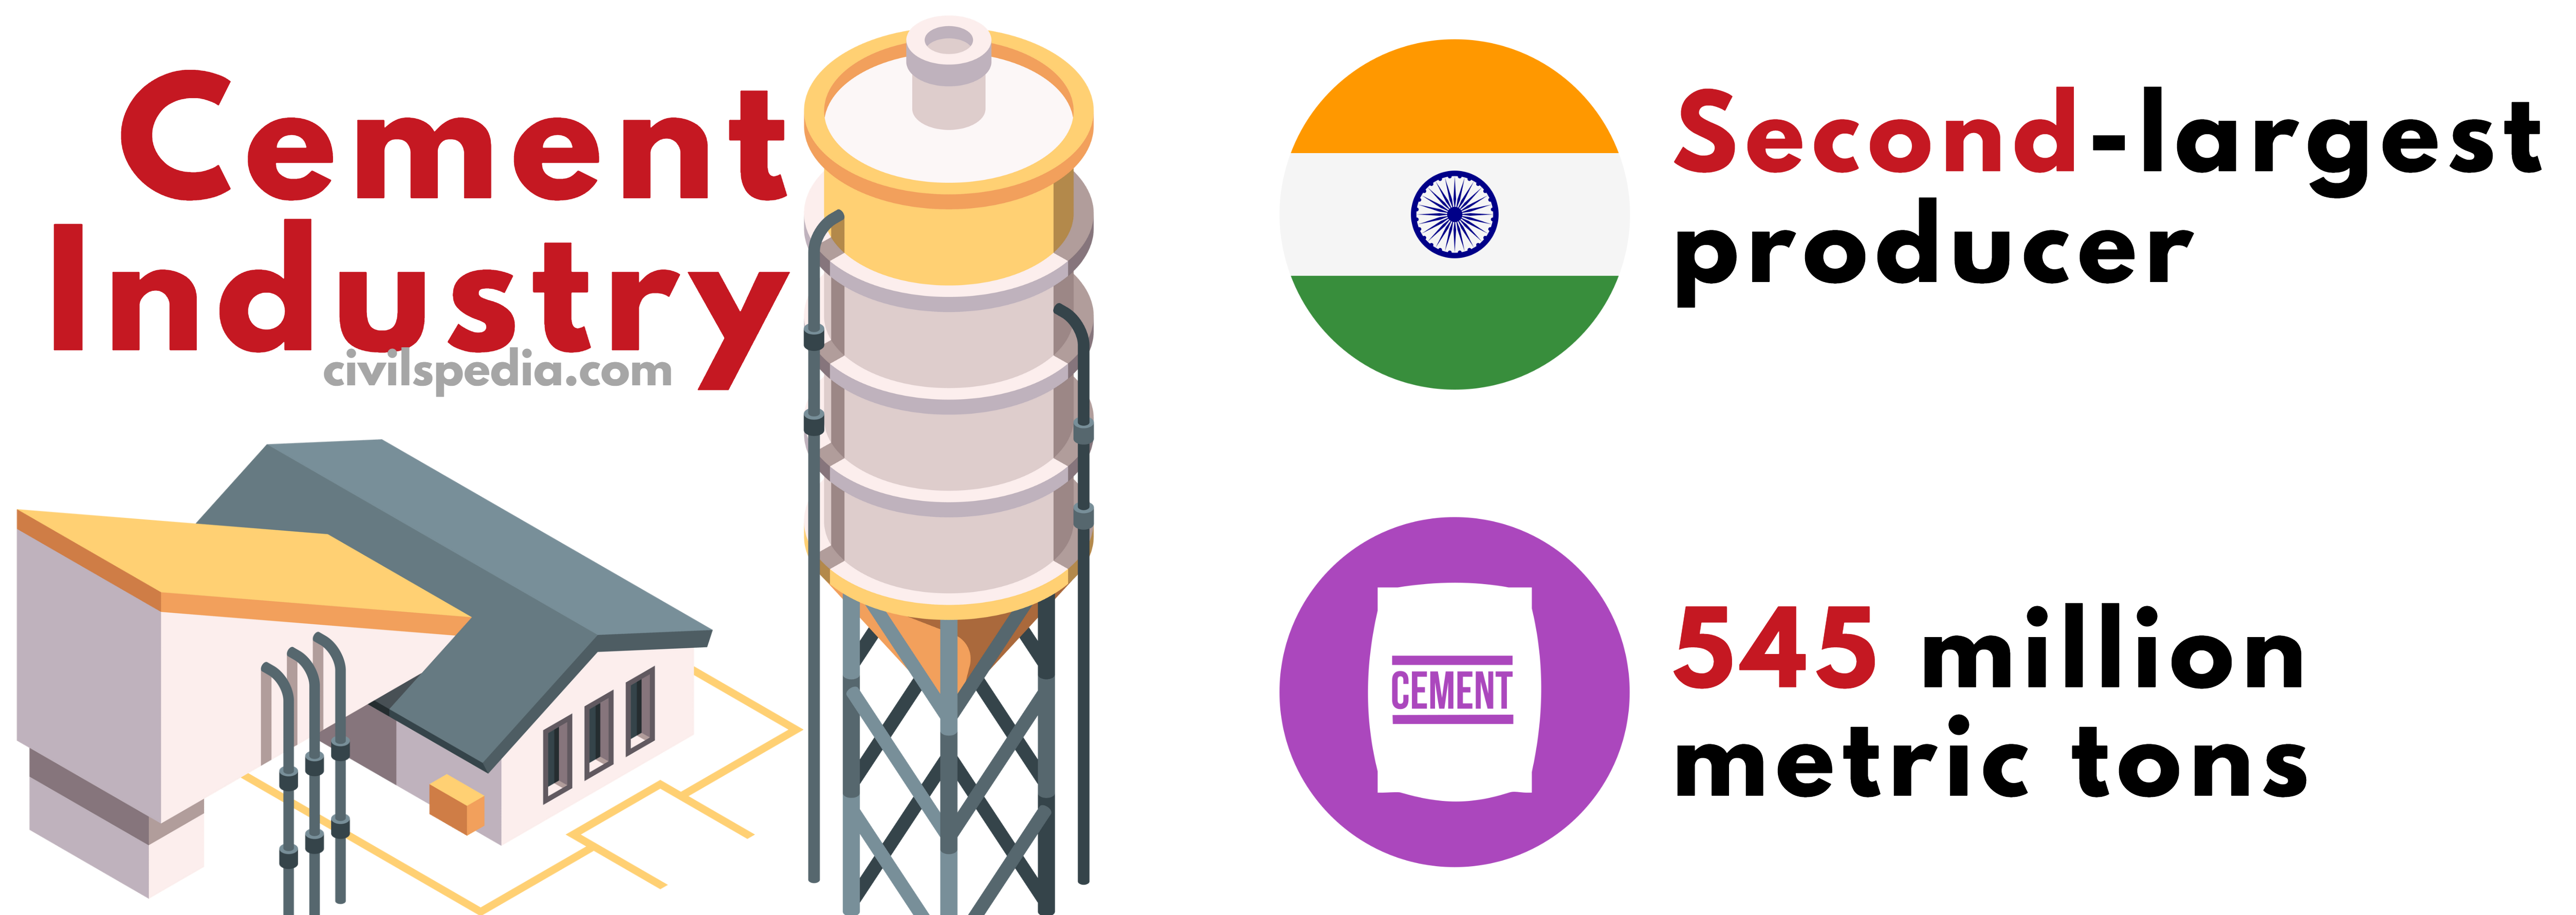 Cement Industry in India